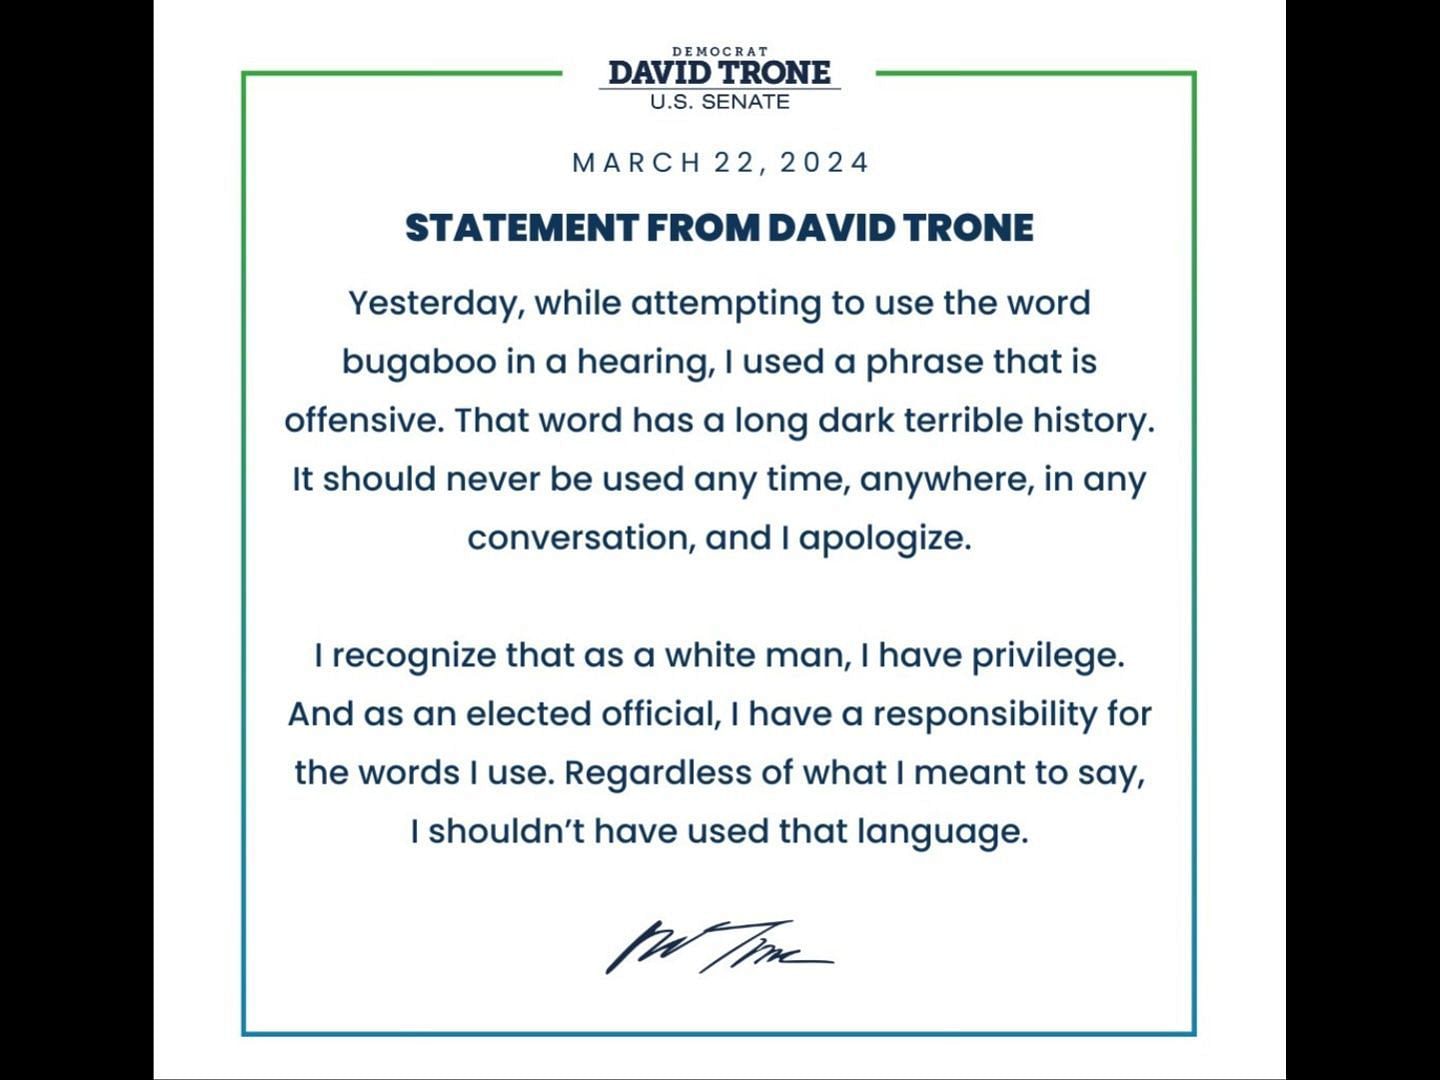 Rep. Trone apologized for using the offensive term at the budget hearing on Thursday. (Image via X/@davidjtrone)